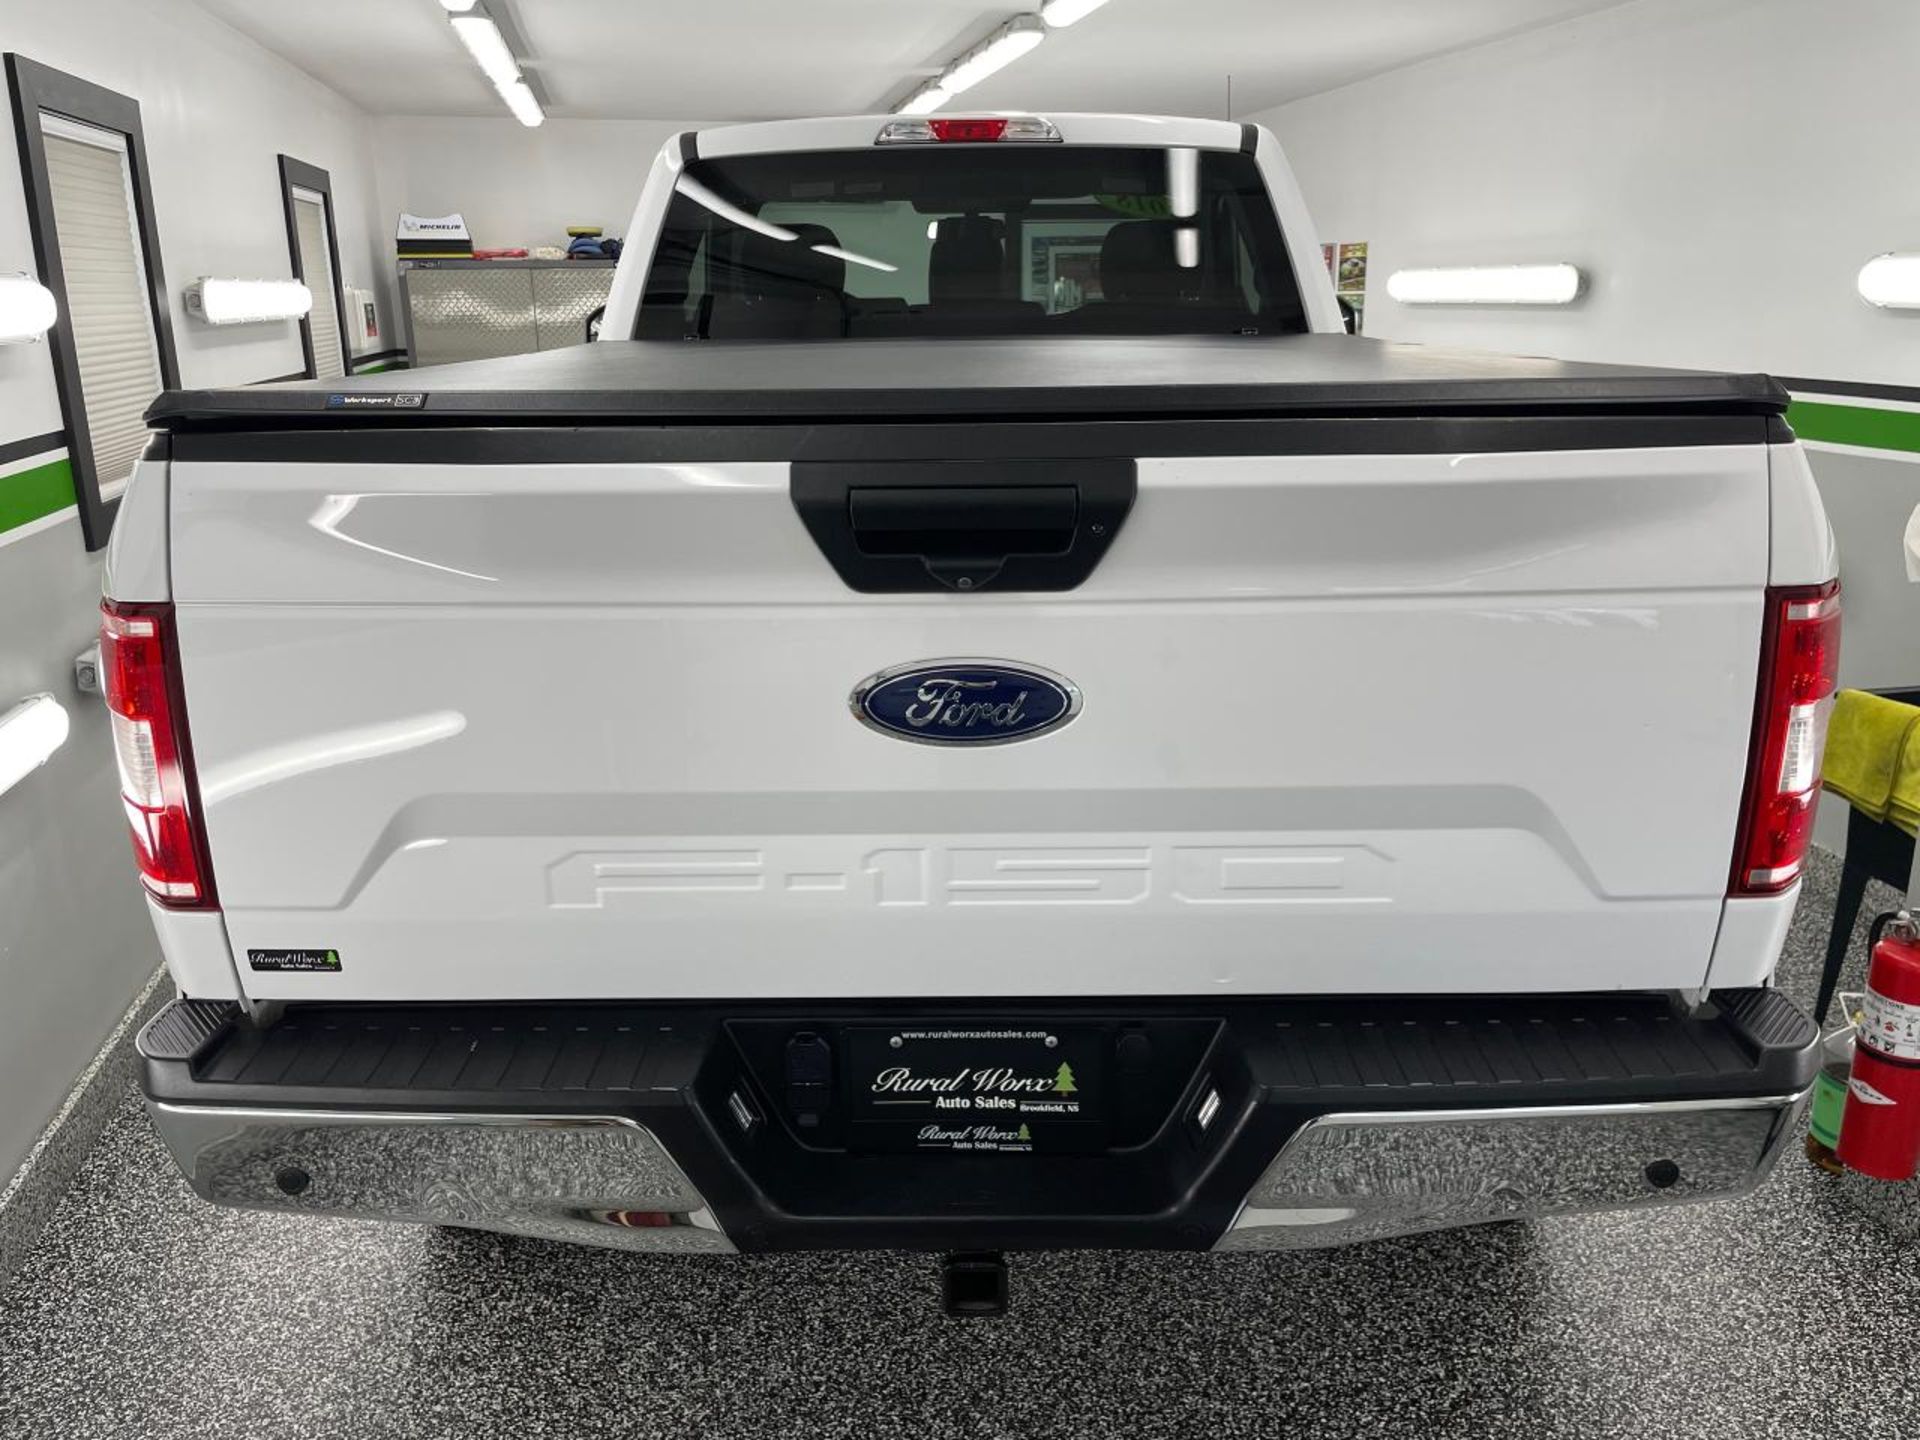 2018 FORD F-150 XLT (SHORTY) - Image 6 of 9